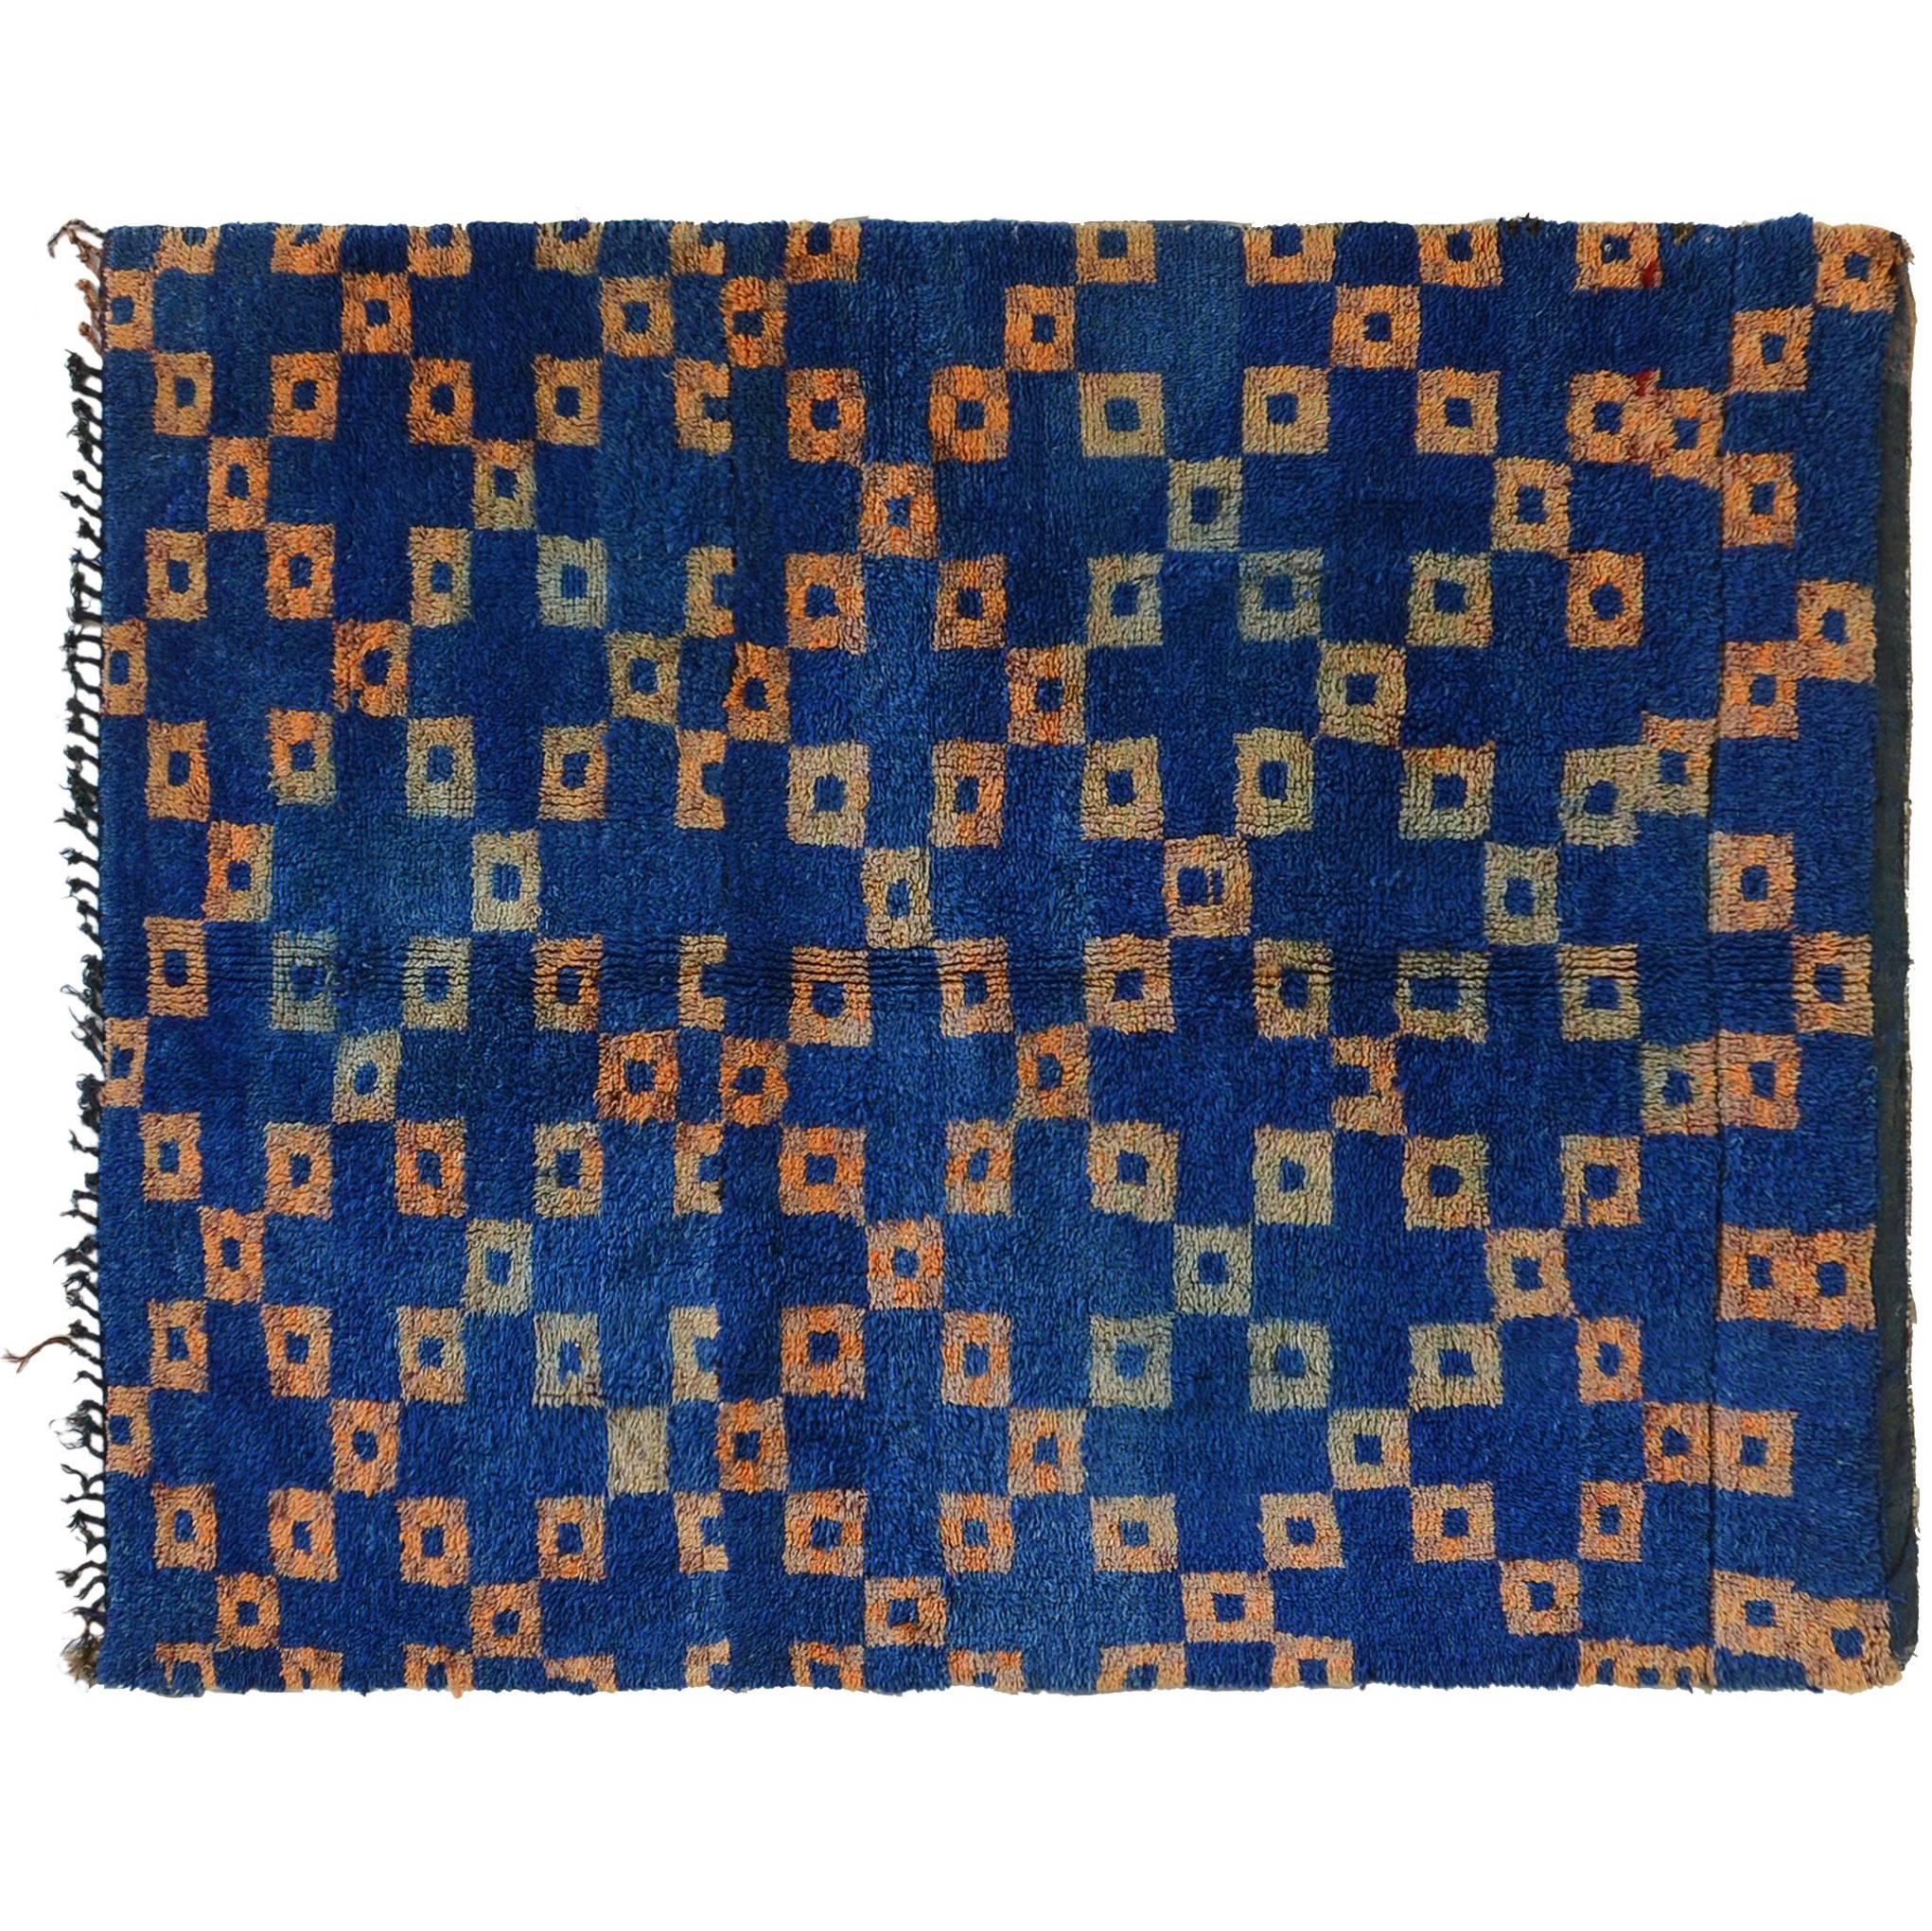 Blue Moroccan Rug with Orange Boxes